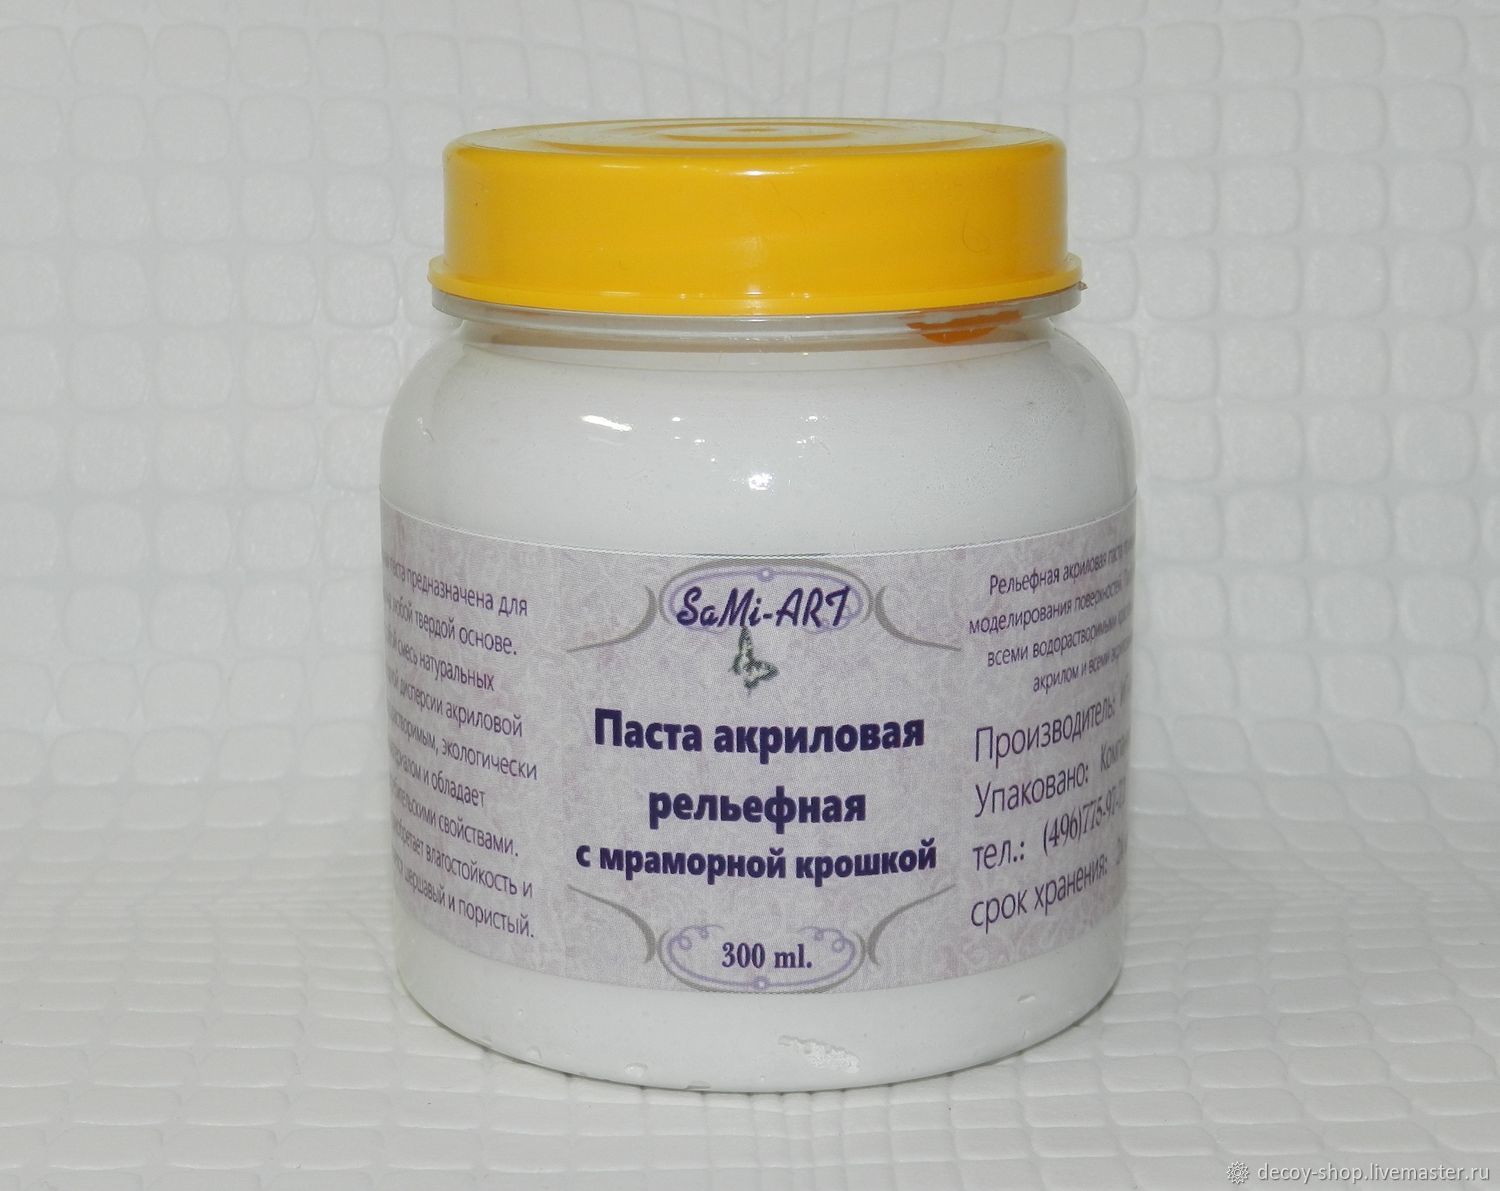 Relief paste with a marble crumb. 300 ml -265 RUB.
